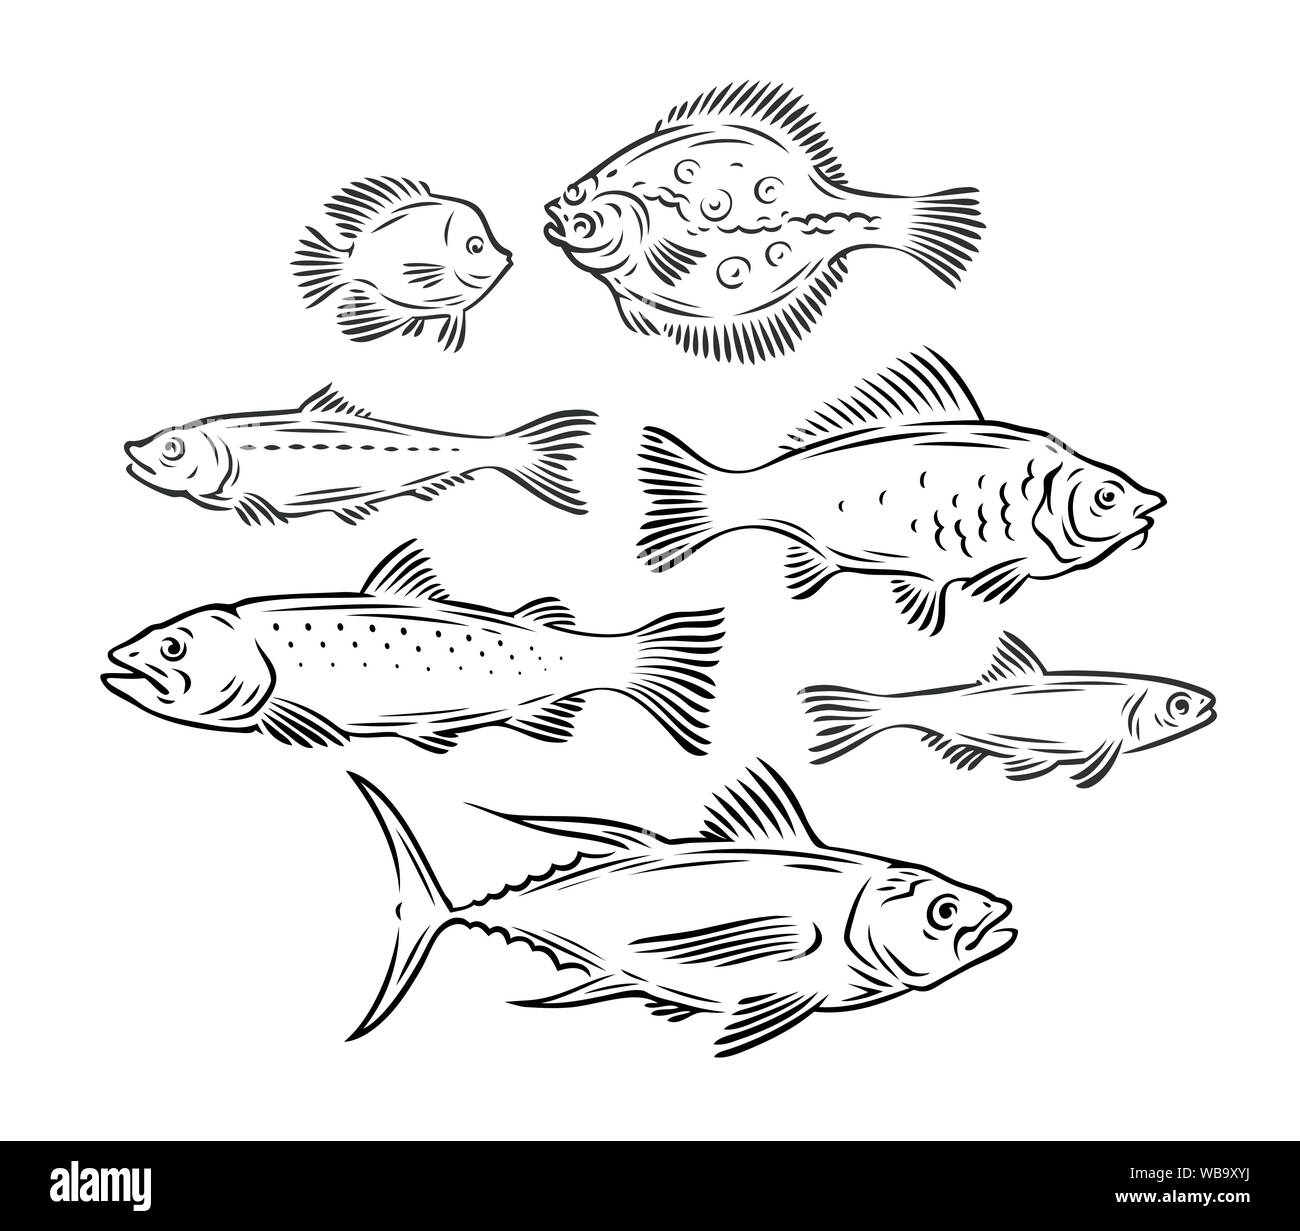 Fishy fish Stock Vector Images - Alamy